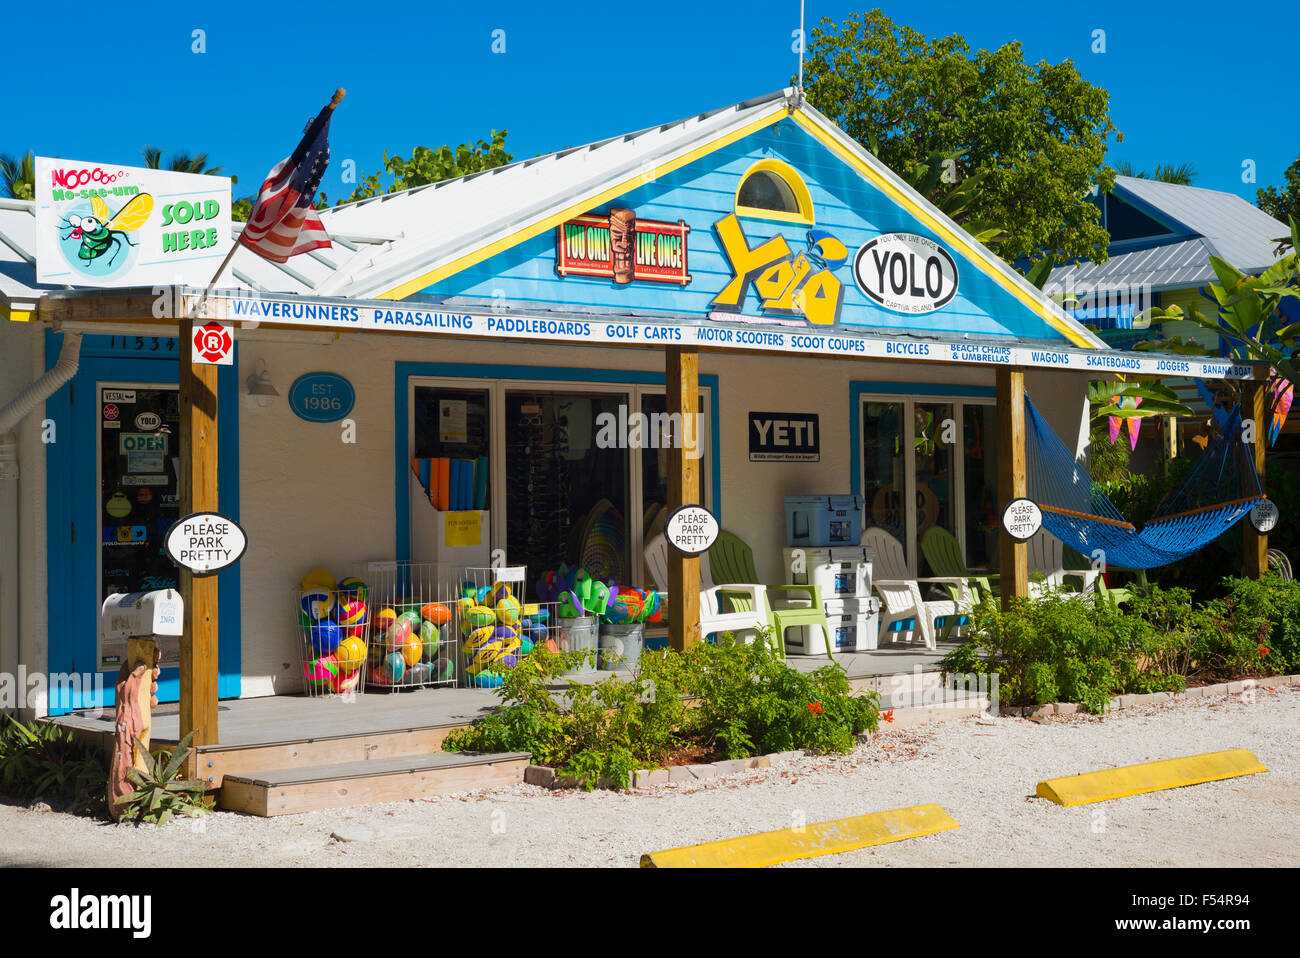 Souvenir and watersports equipment shop Yolo with adirondack chairs and hammock in downtown Captiva Island in Florida, USA Stock Photo